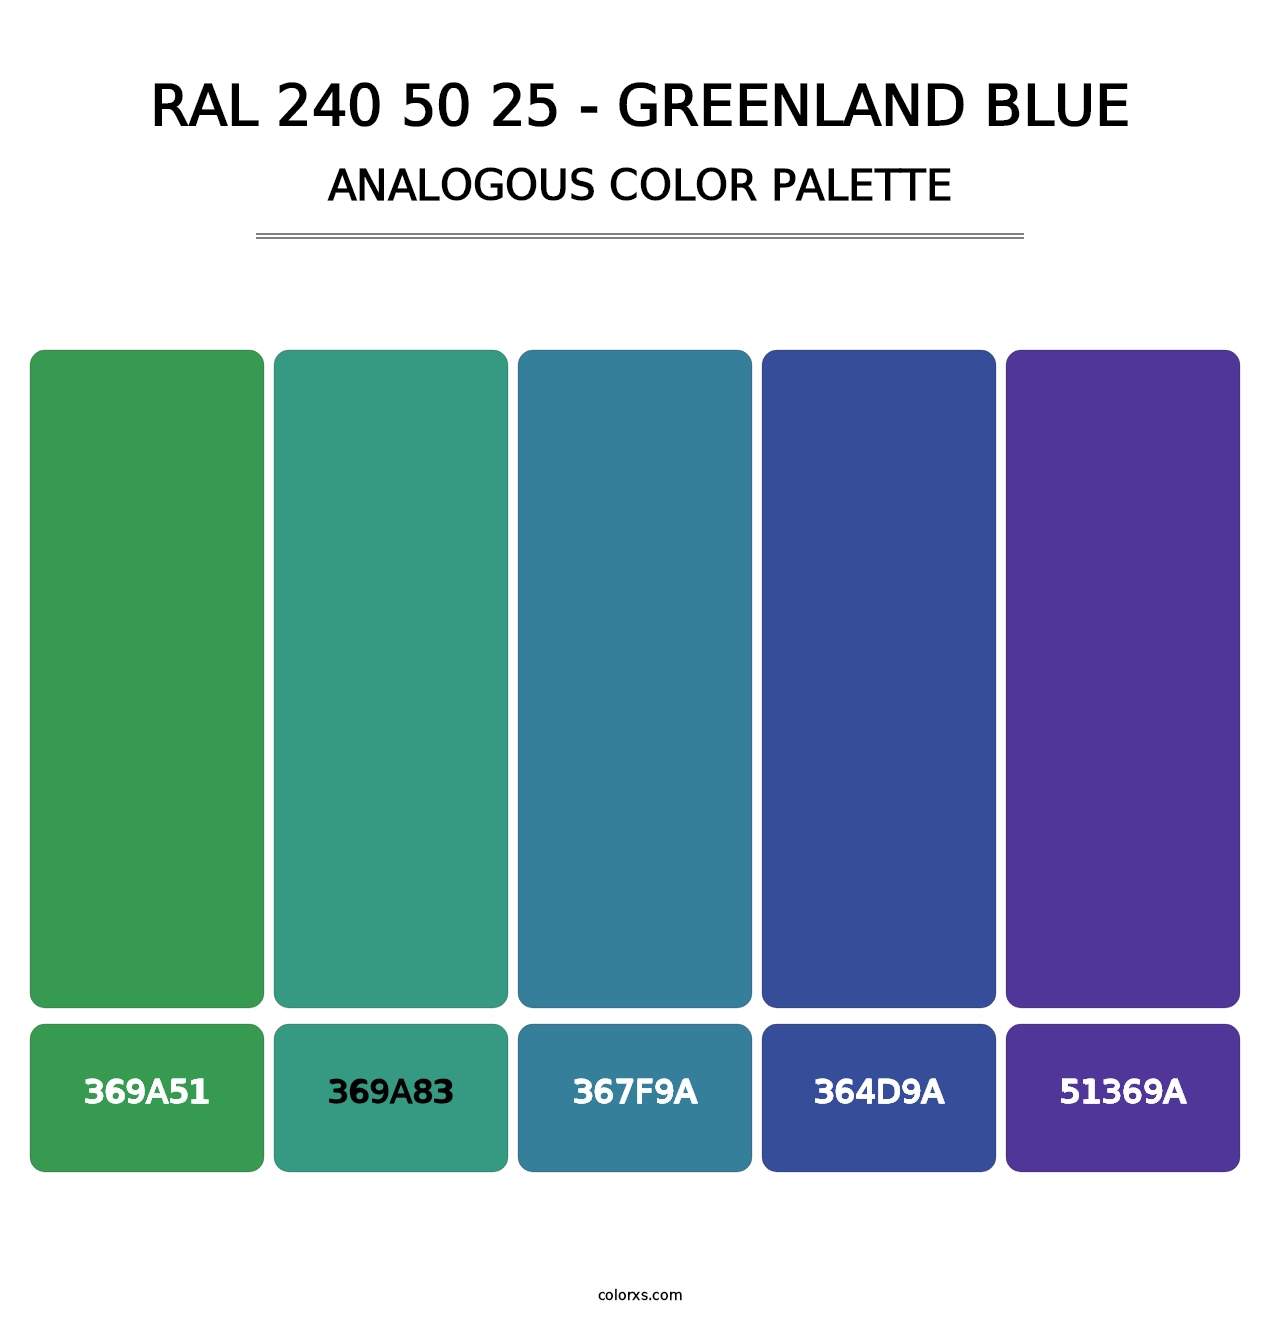 RAL 240 50 25 - Greenland Blue - Analogous Color Palette